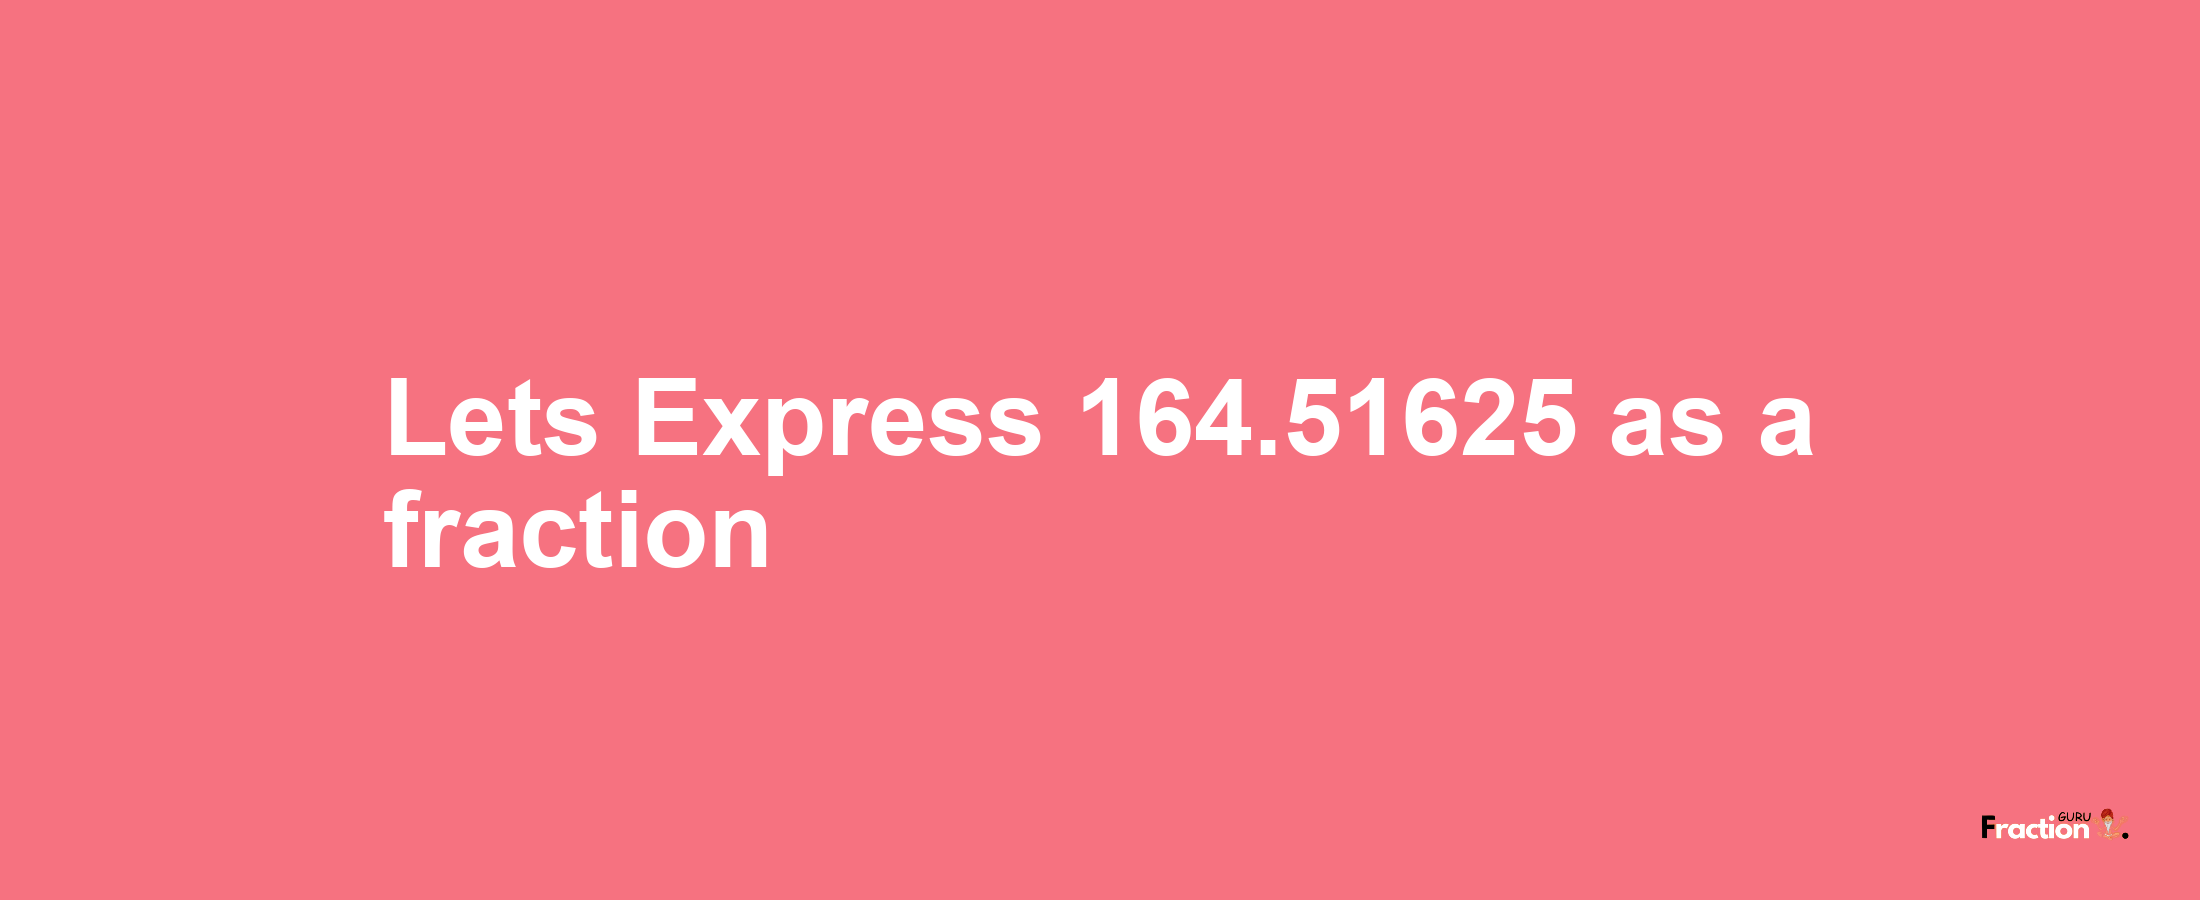 Lets Express 164.51625 as afraction